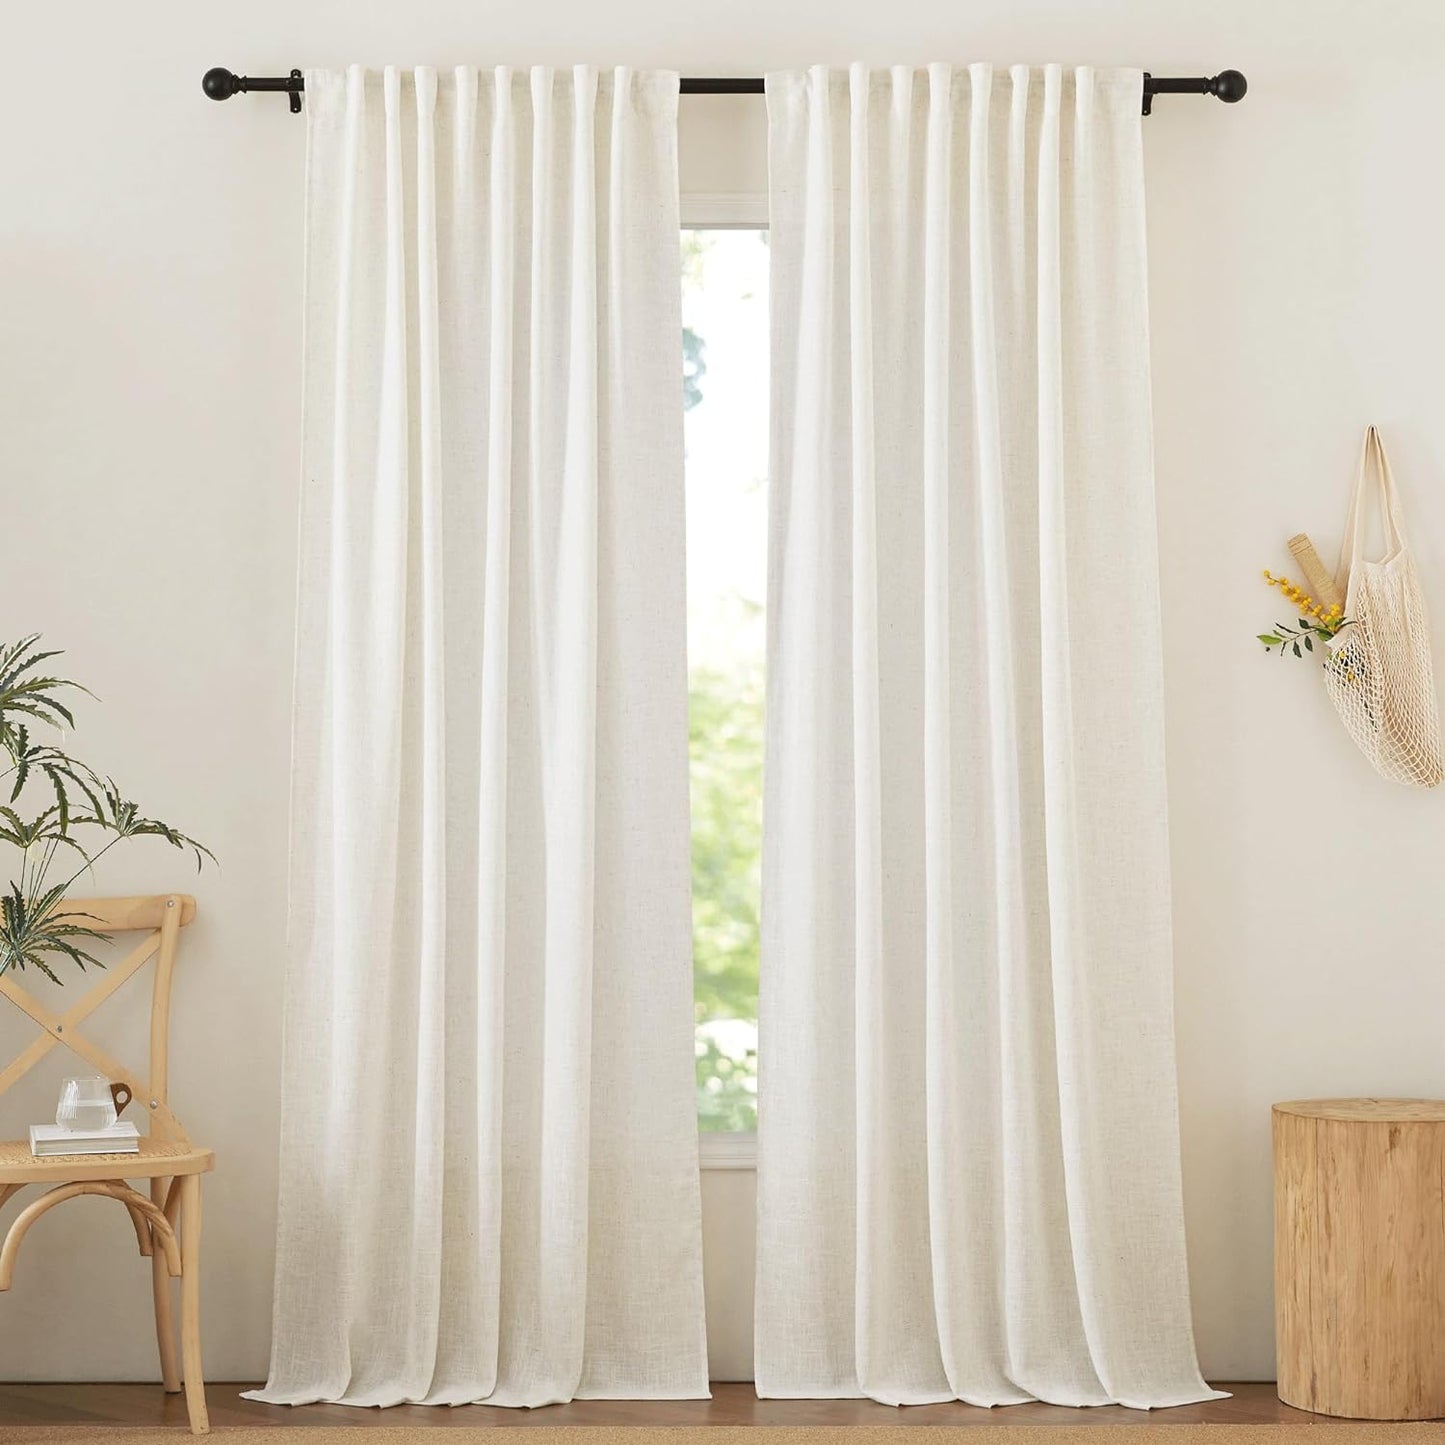 NICETOWN Linen Textured Curtain for Bedroom/Living Room Thermal Insulated Back Tab Linen Look Curtain Drapes Soft Rich Material Light Reducing Drape Panels for Window, 2 Panels, 52 X 84 Inch, Linen  NICETOWN   